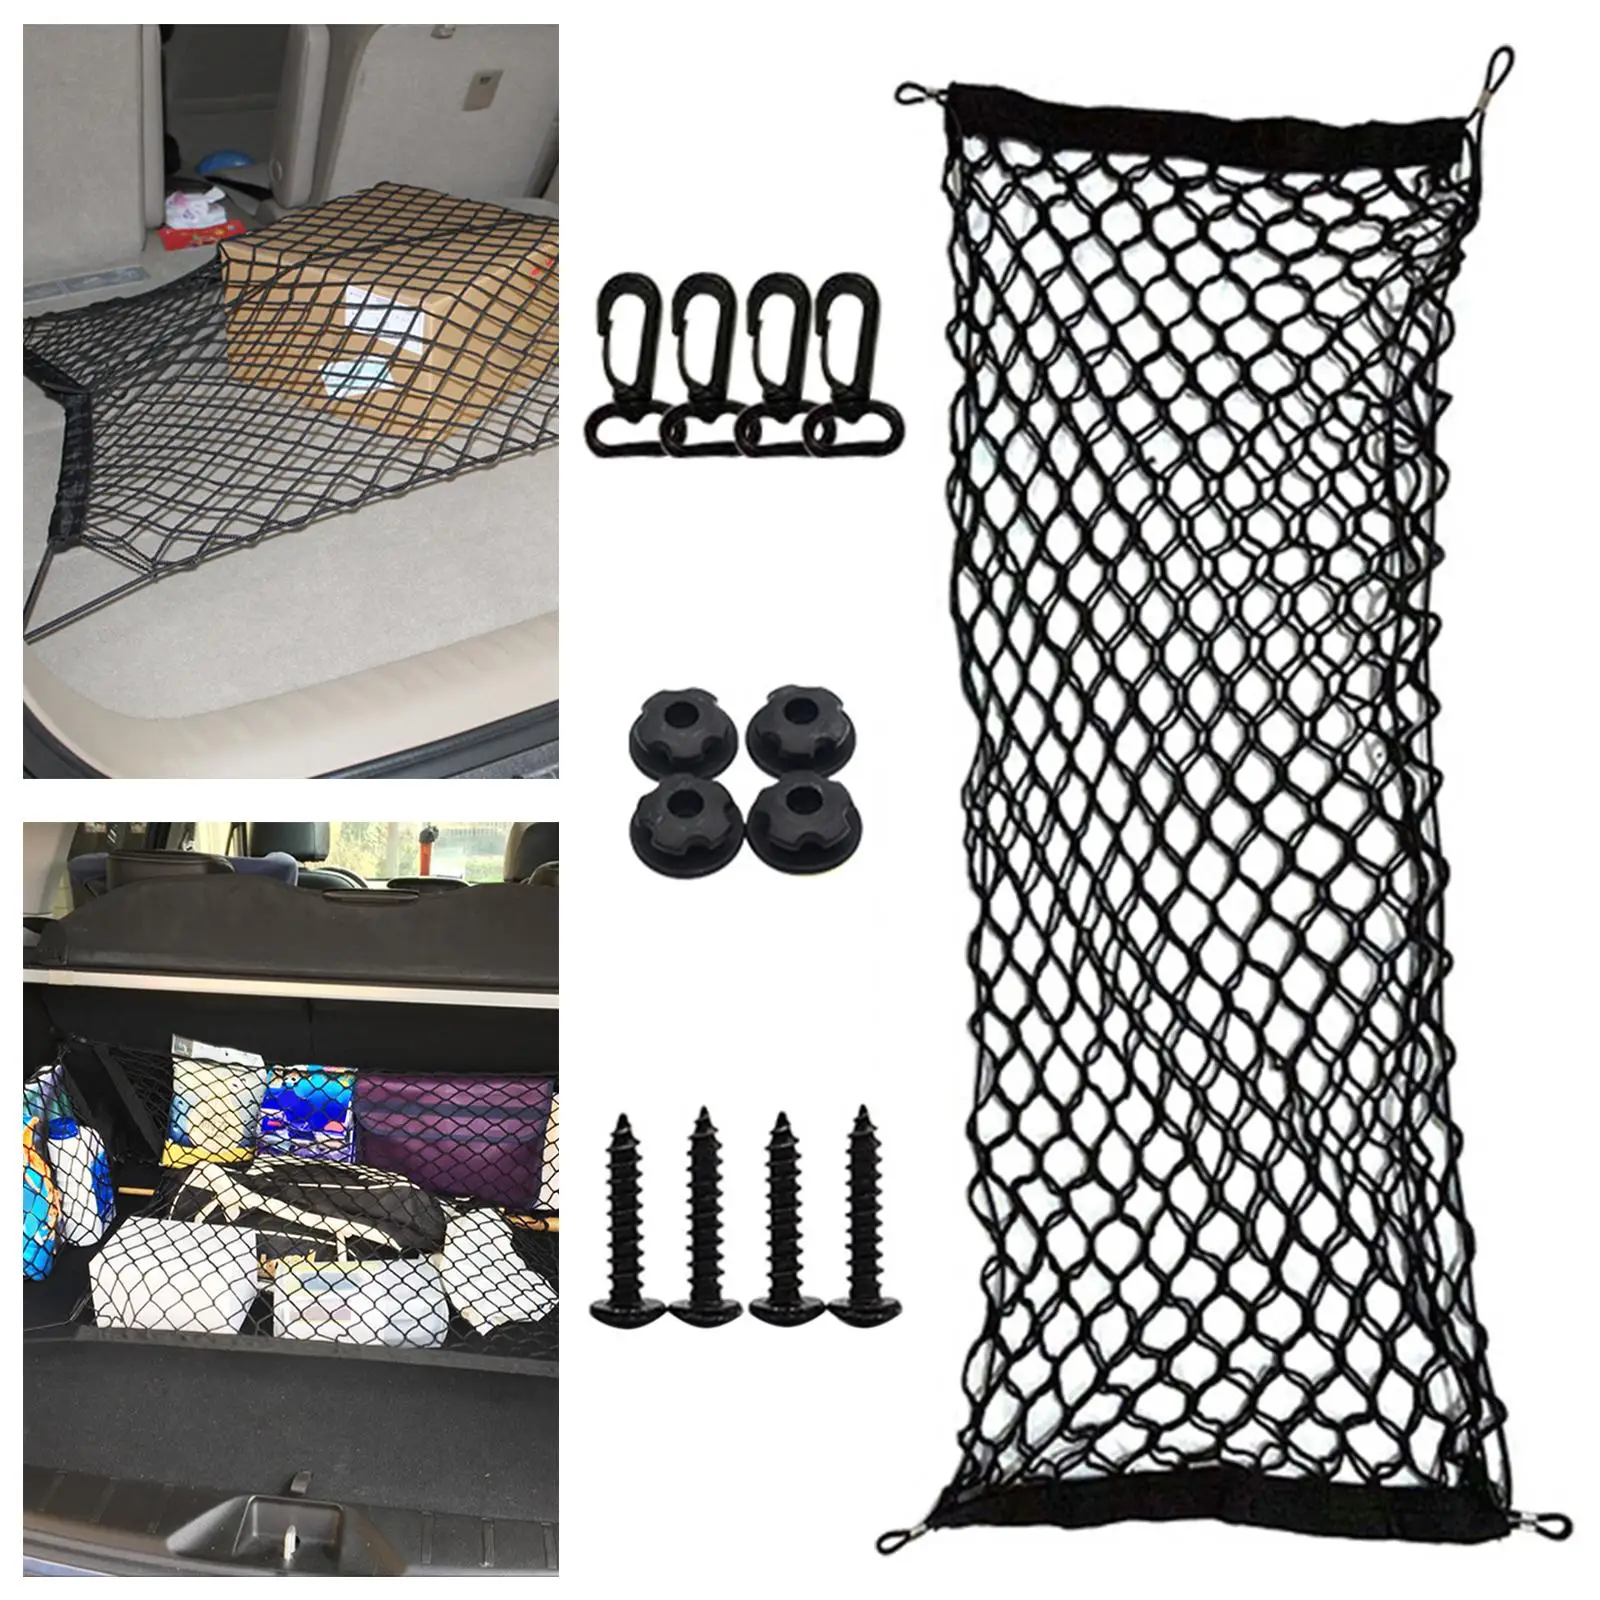  Mesh Nylon Holder  Car Boot Trunk Double-Layer Stretchable  Rear Back Organizer Storage Adjustable Fits for Car Vehicle